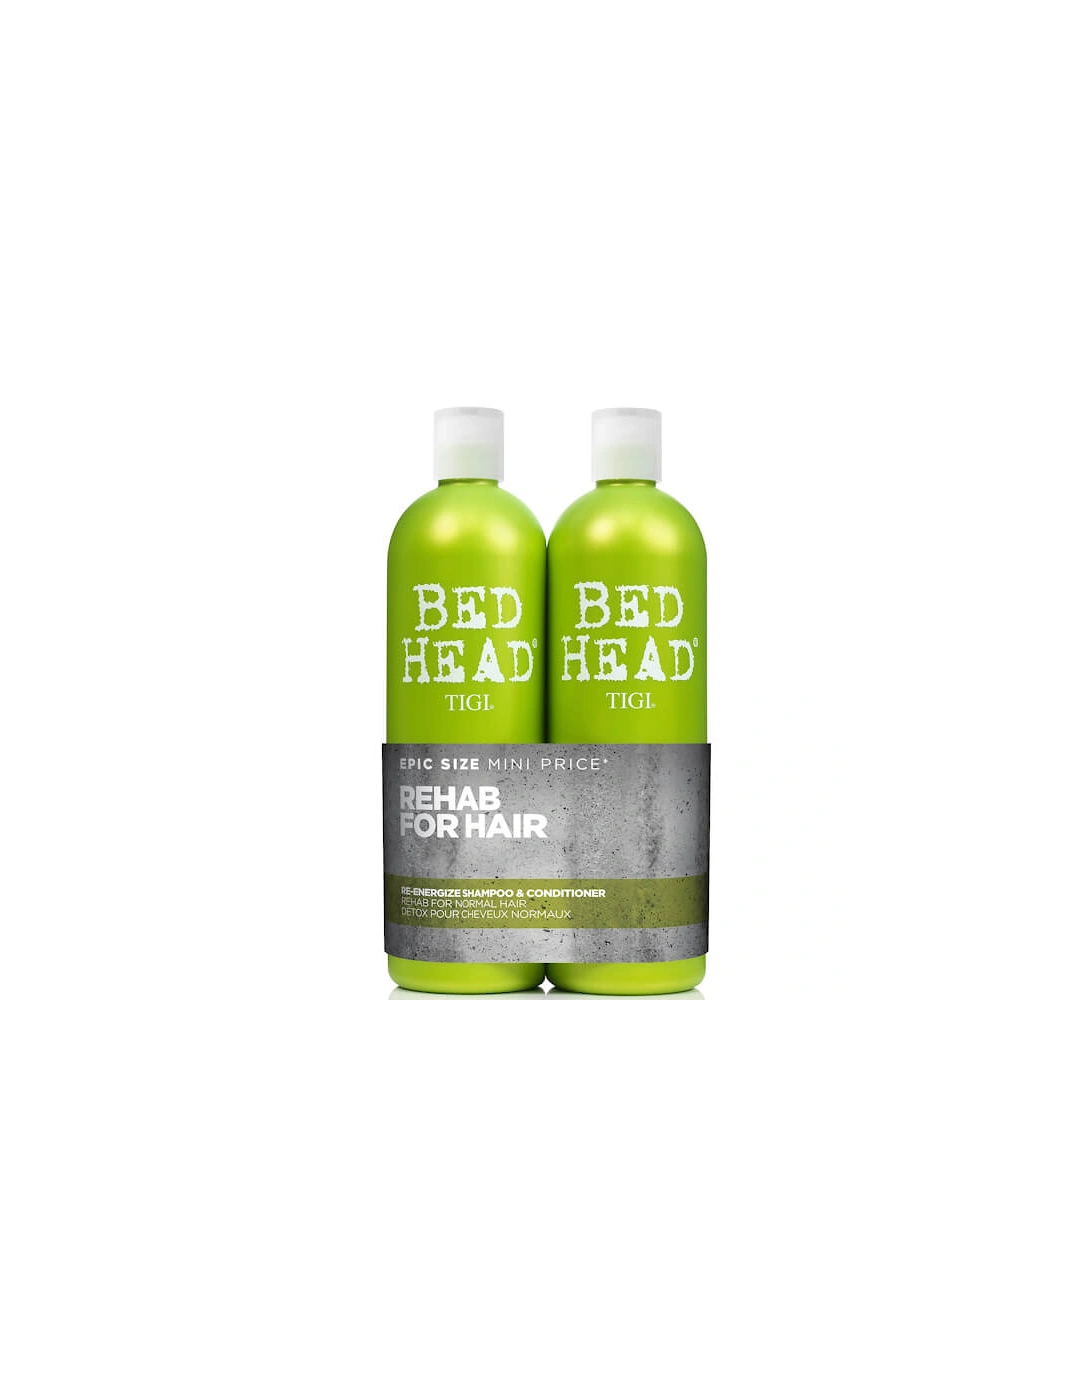 Bed Head Urban Antidotes Re-energize Daily Shampoo and Conditioner for Normal Hair 2 x 750ml - TIGI, 2 of 1